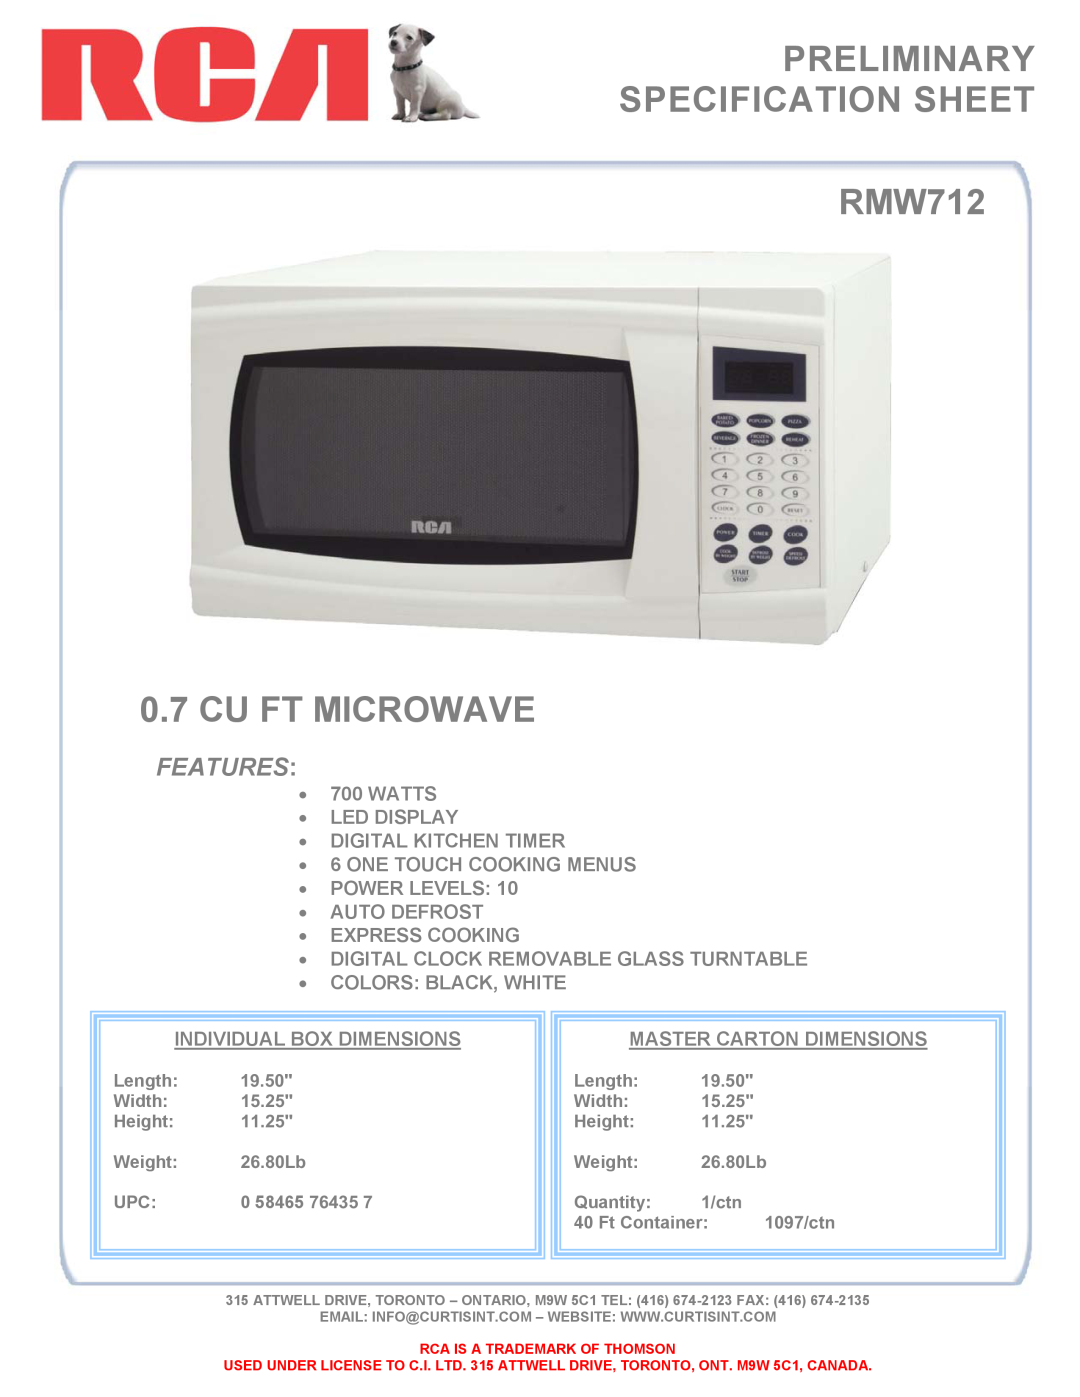 Curtis specifications PRELIMINARY SPECIFICATION SHEET RMW712, Cu Ft Microwave, Features 